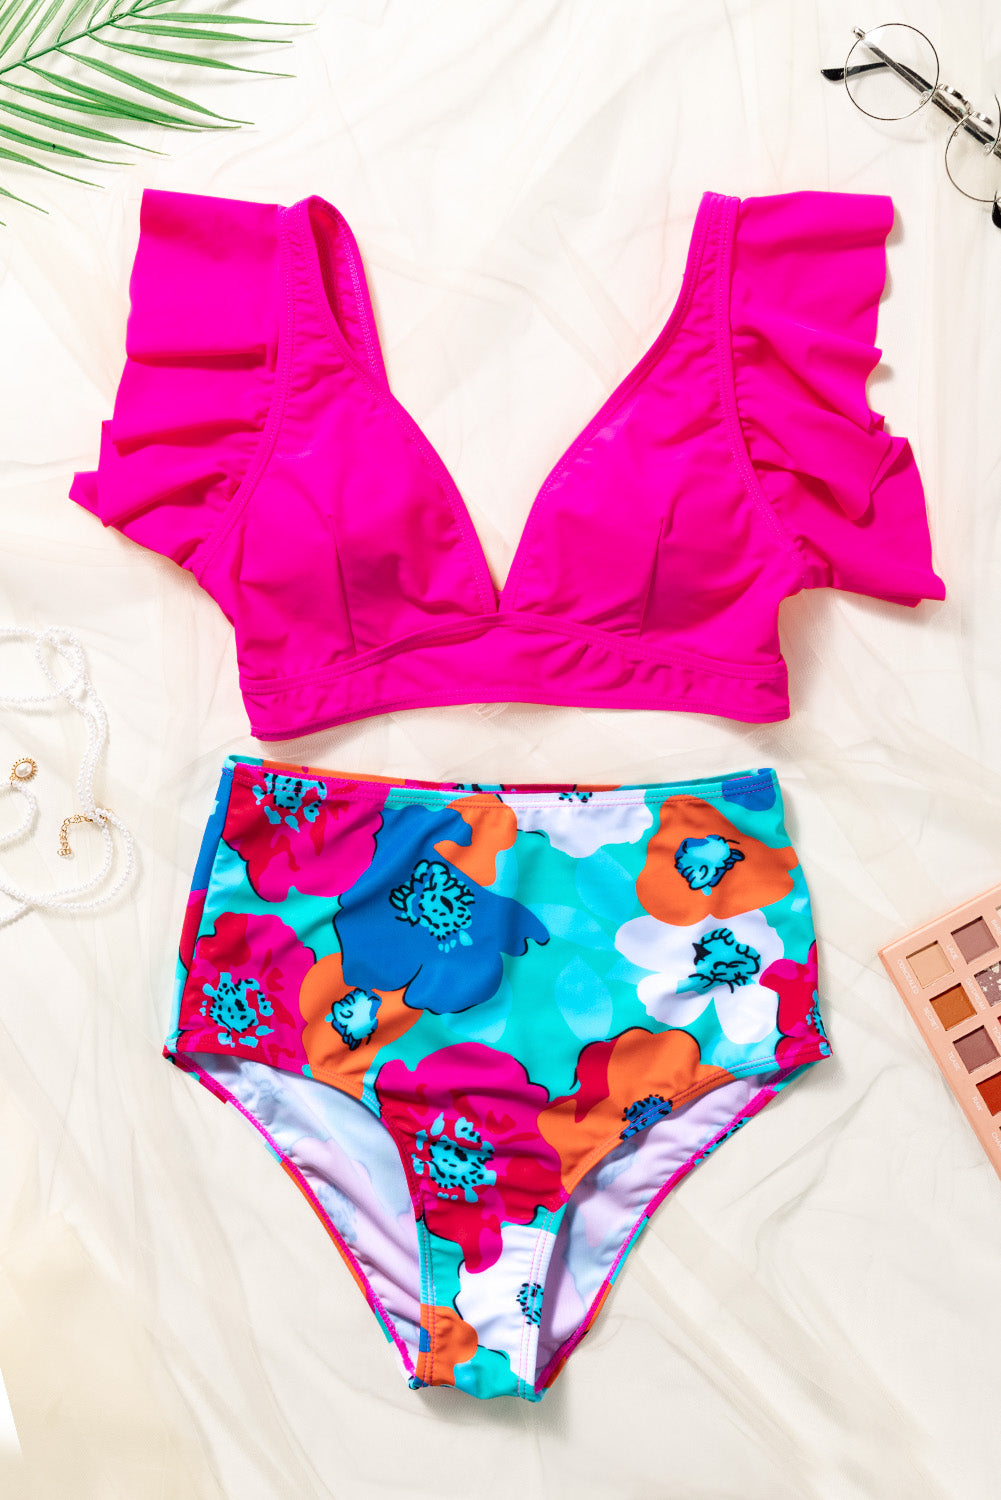 Brighten your beach days with our pink ruffle top and vibrant floral high-waisted swim set—perfect for stylish comfort and fun in the sun.